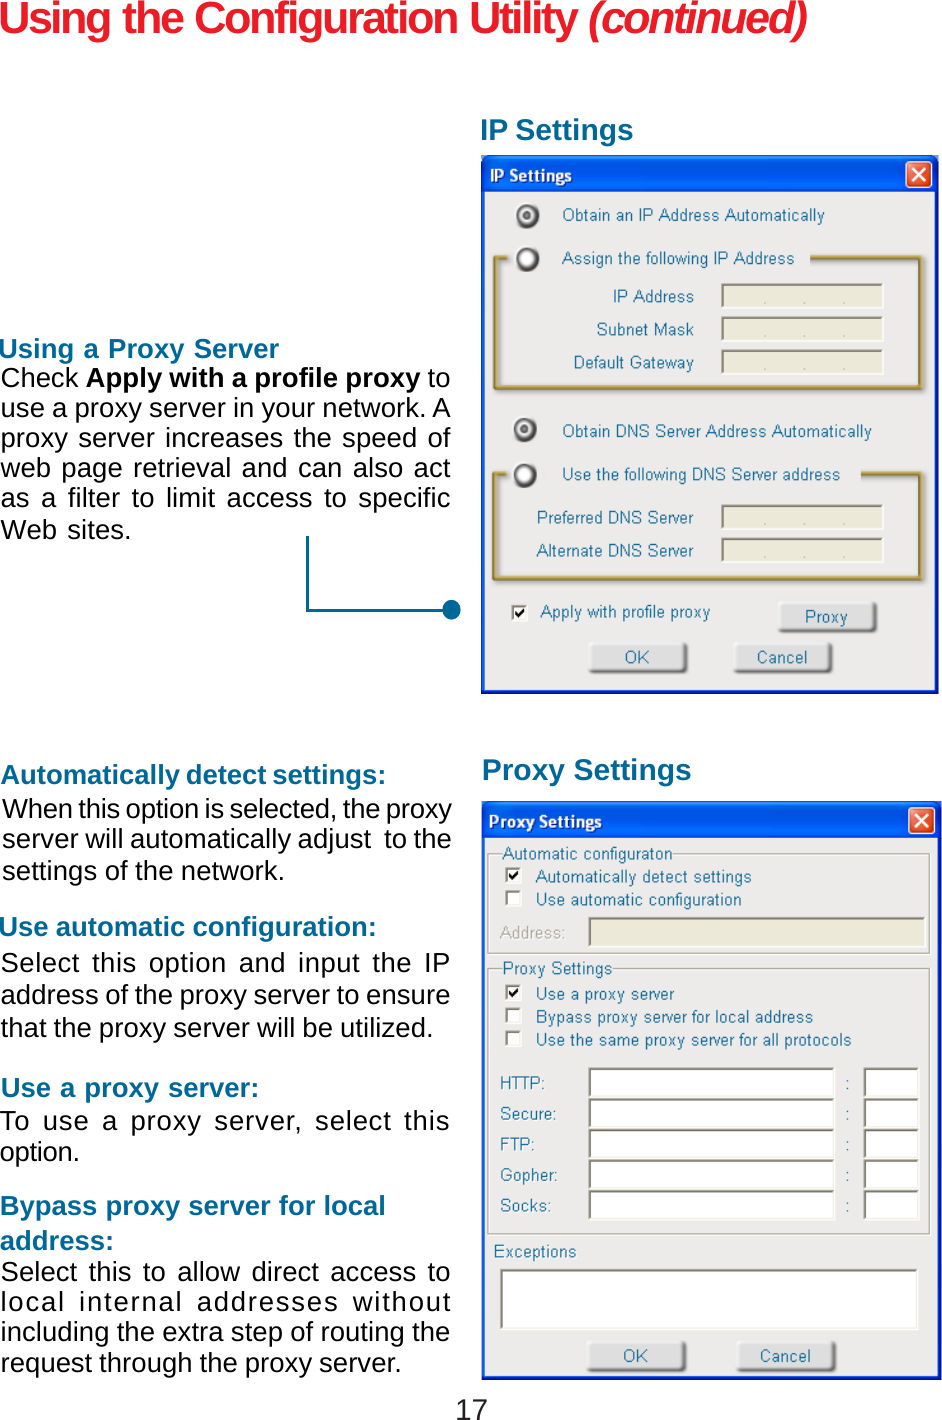 17Using the Configuration Utility (continued)IP SettingsProxy SettingsCheck Apply with a profile proxy touse a proxy server in your network. Aproxy server increases the speed ofweb page retrieval and can also actas a filter to limit access to specificWeb sites.Using a Proxy ServerWhen this option is selected, the proxyserver will automatically adjust  to thesettings of the network.Automatically detect settings:Select this option and input the IPaddress of the proxy server to ensurethat the proxy server will be utilized.Use automatic configuration:To use a proxy server, select thisoption.Use a proxy server:Select this to allow direct access tolocal internal addresses withoutincluding the extra step of routing therequest through the proxy server.Bypass proxy server for localaddress: